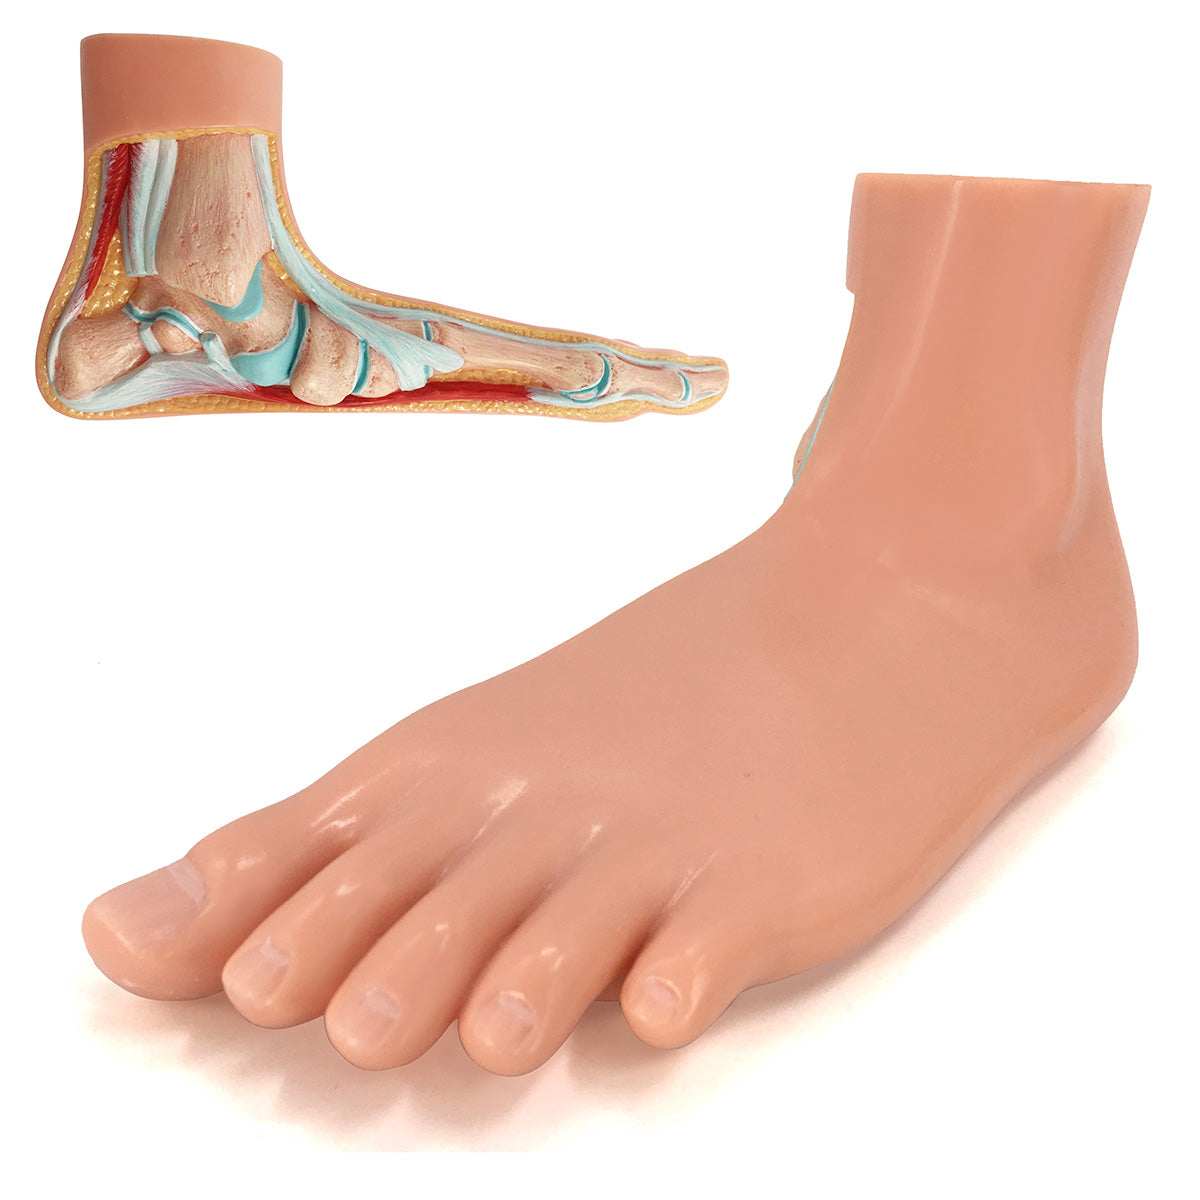 healthy foot structure